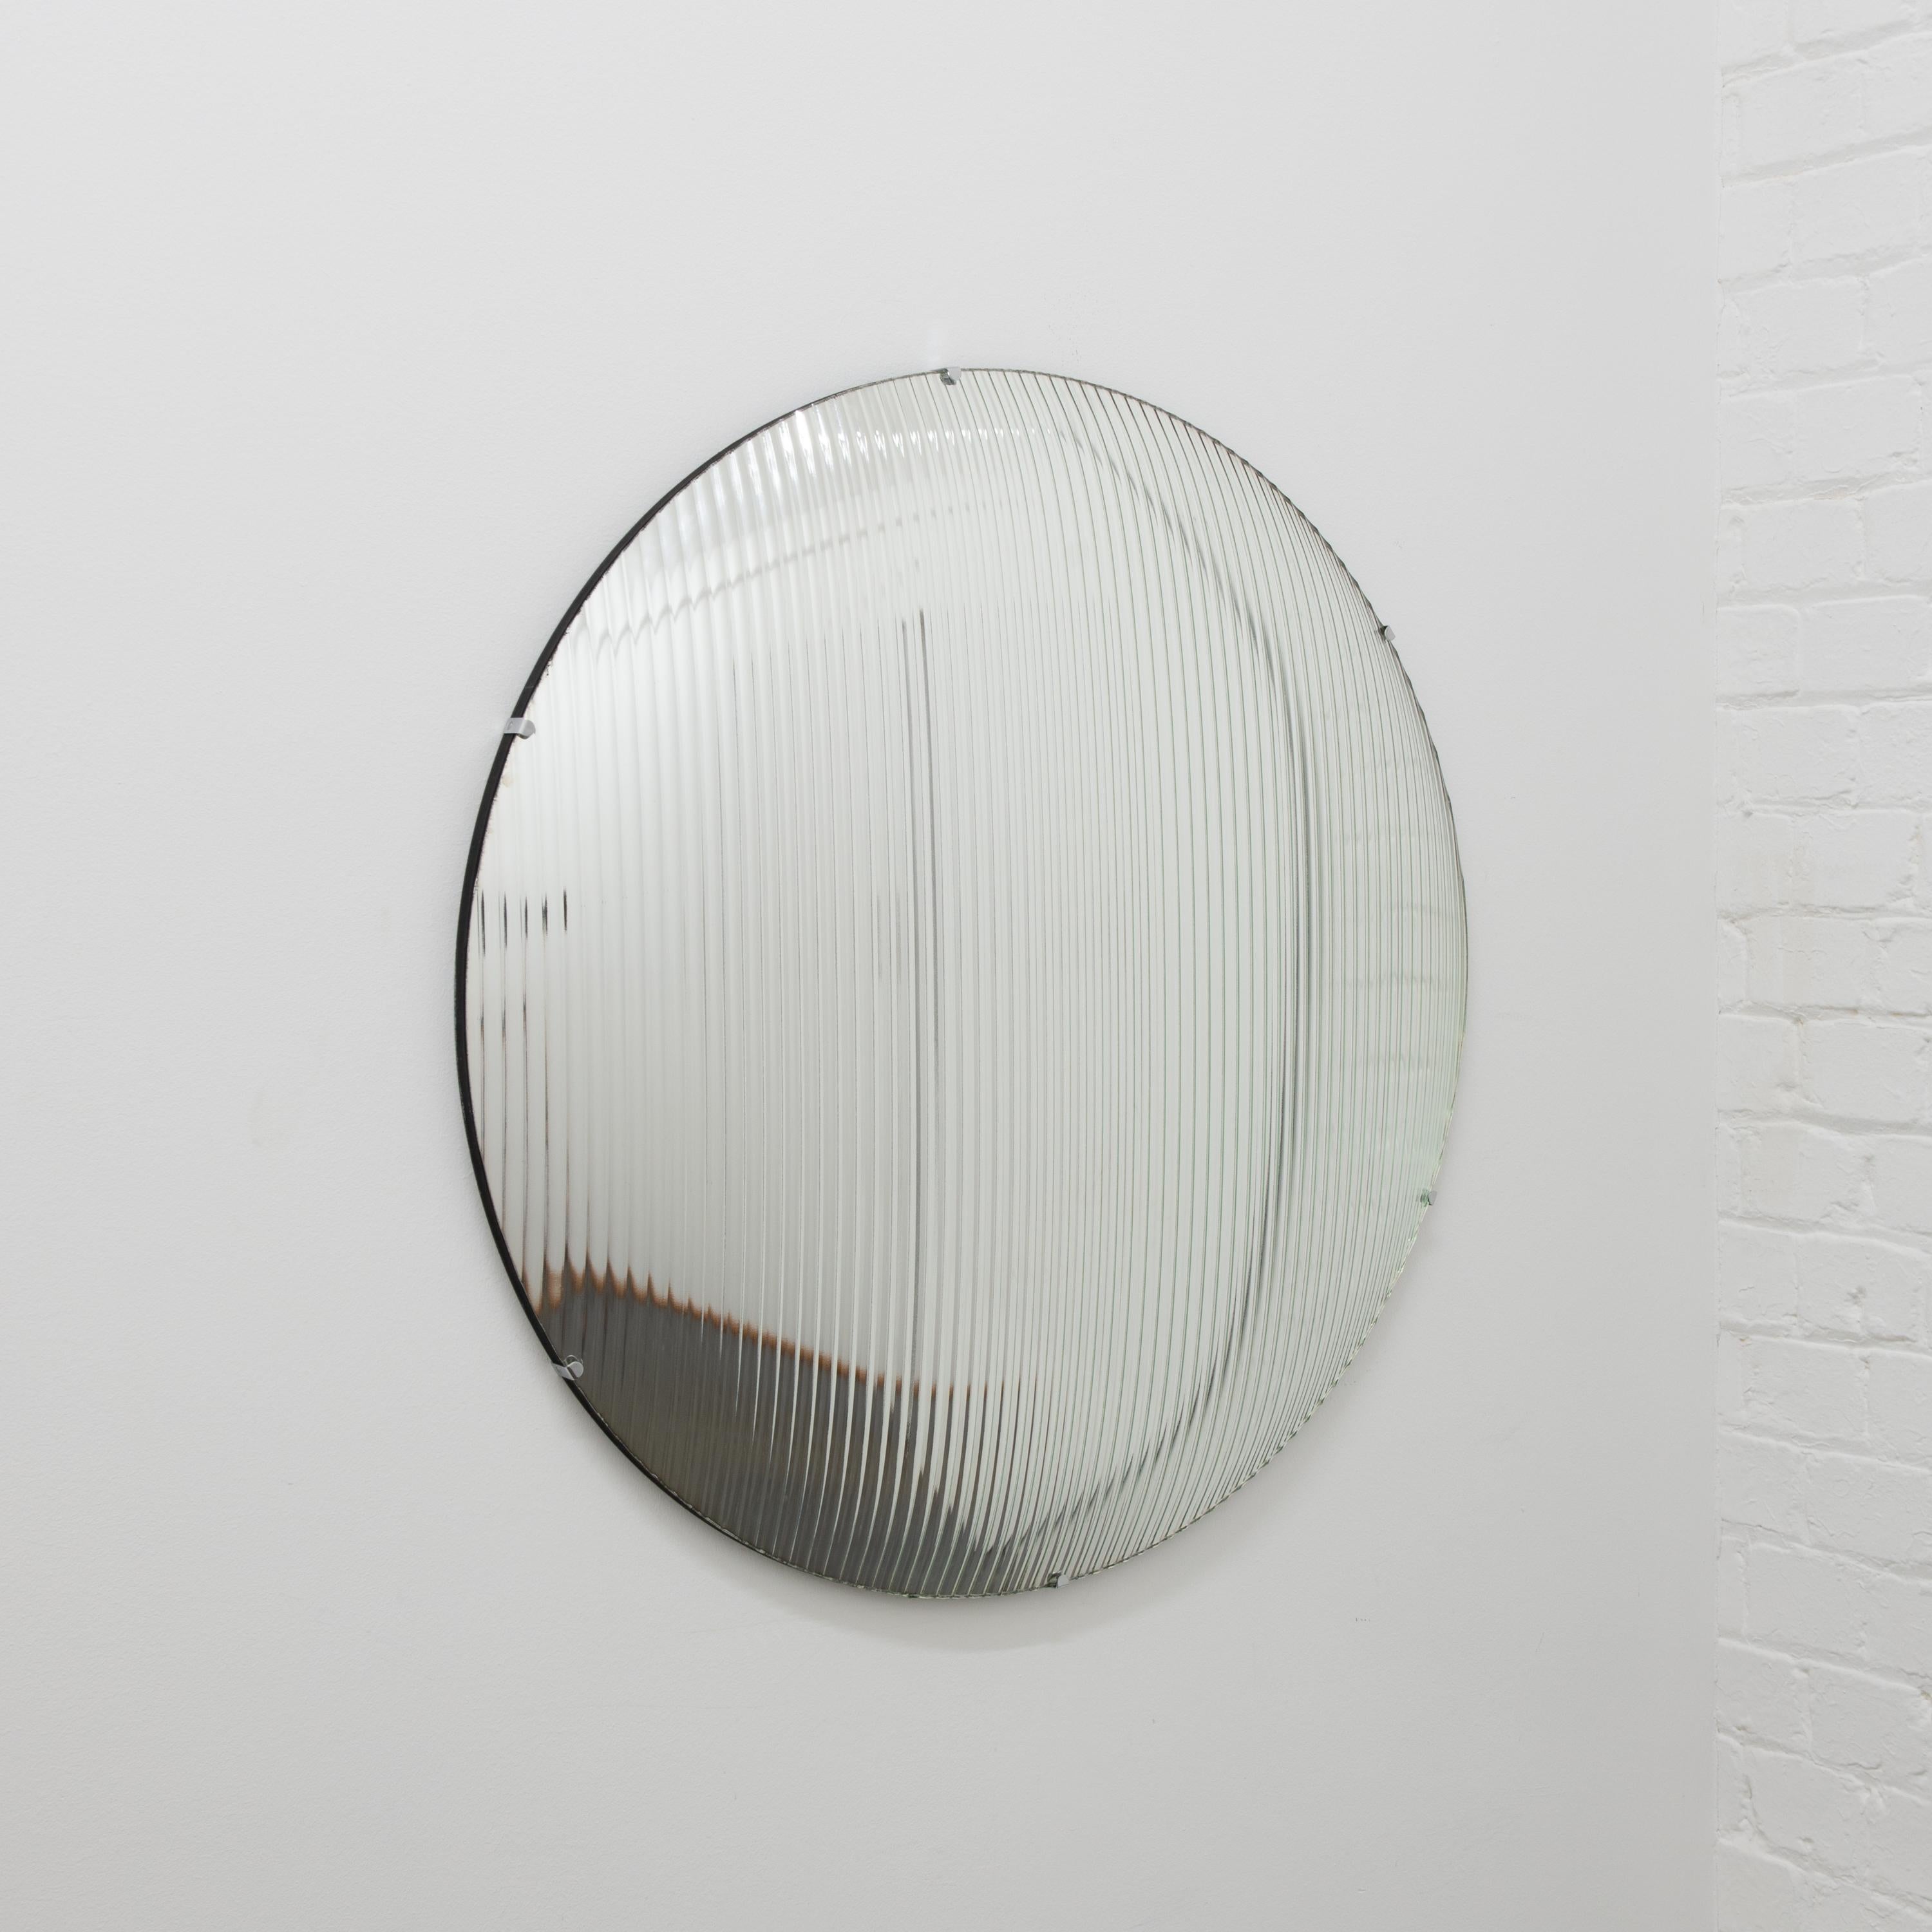 Stunning decorative reeded glass round convex frameless mirror with stainless steel clips.

Each Orbis™ convex mirror is designed and handcrafted in London, UK. Slight variations in sizes and imperfections on edges and surface finishes are